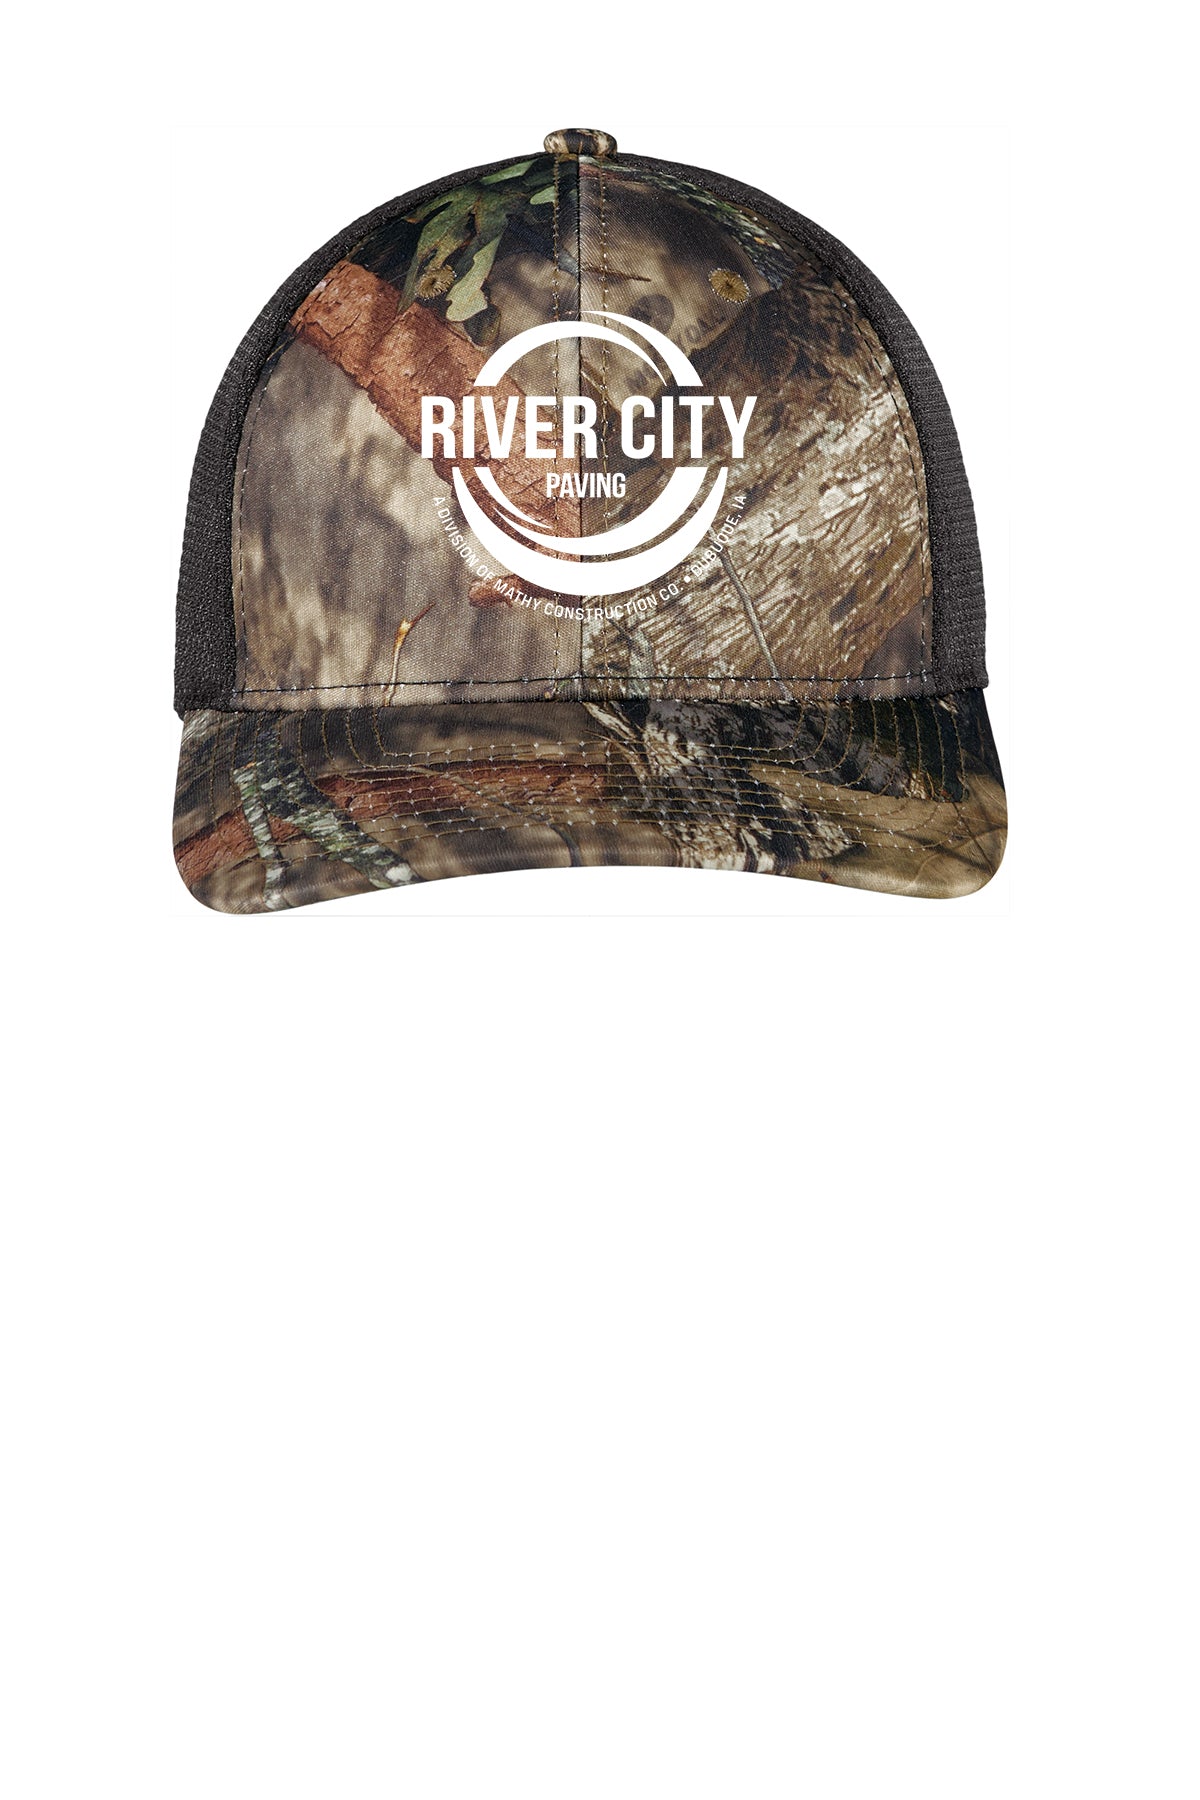 River City Paving Limited Edition Camo Trucker Cap